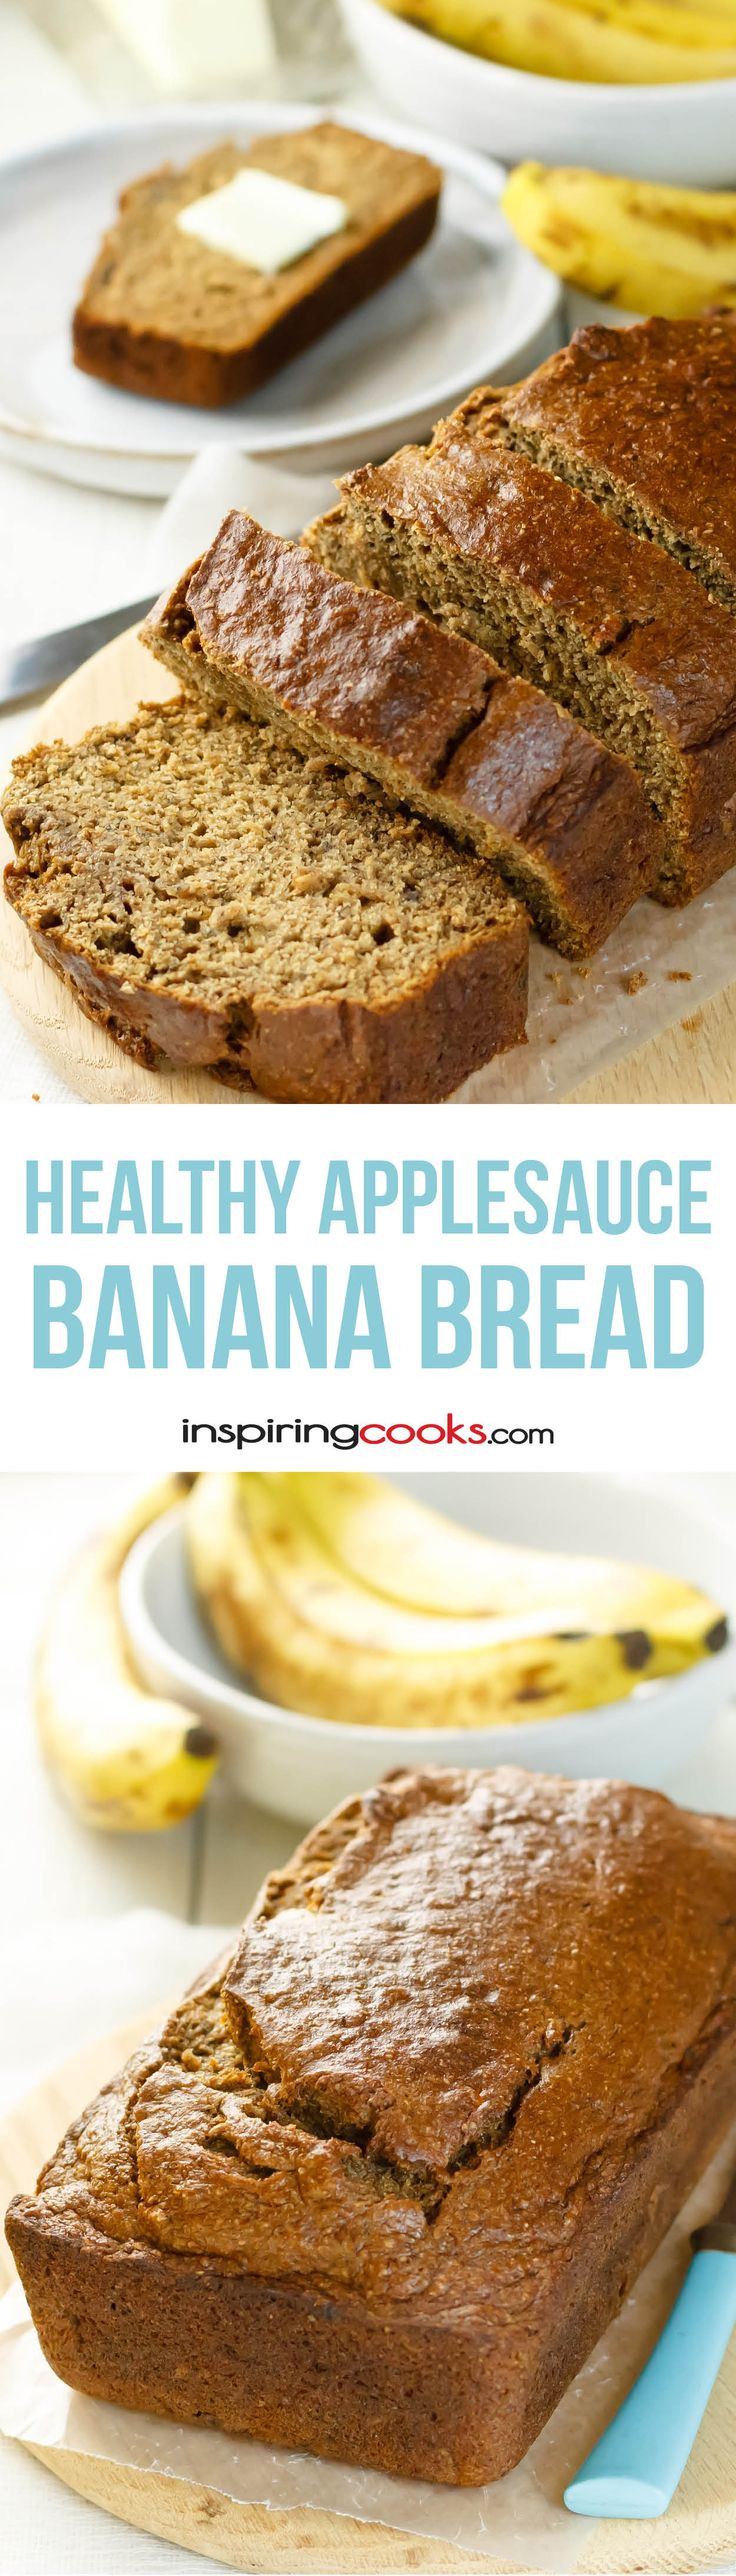 Banana Bread Healthy Applesauce
 Check out Healthy Banana Bread with Applesauce It s so